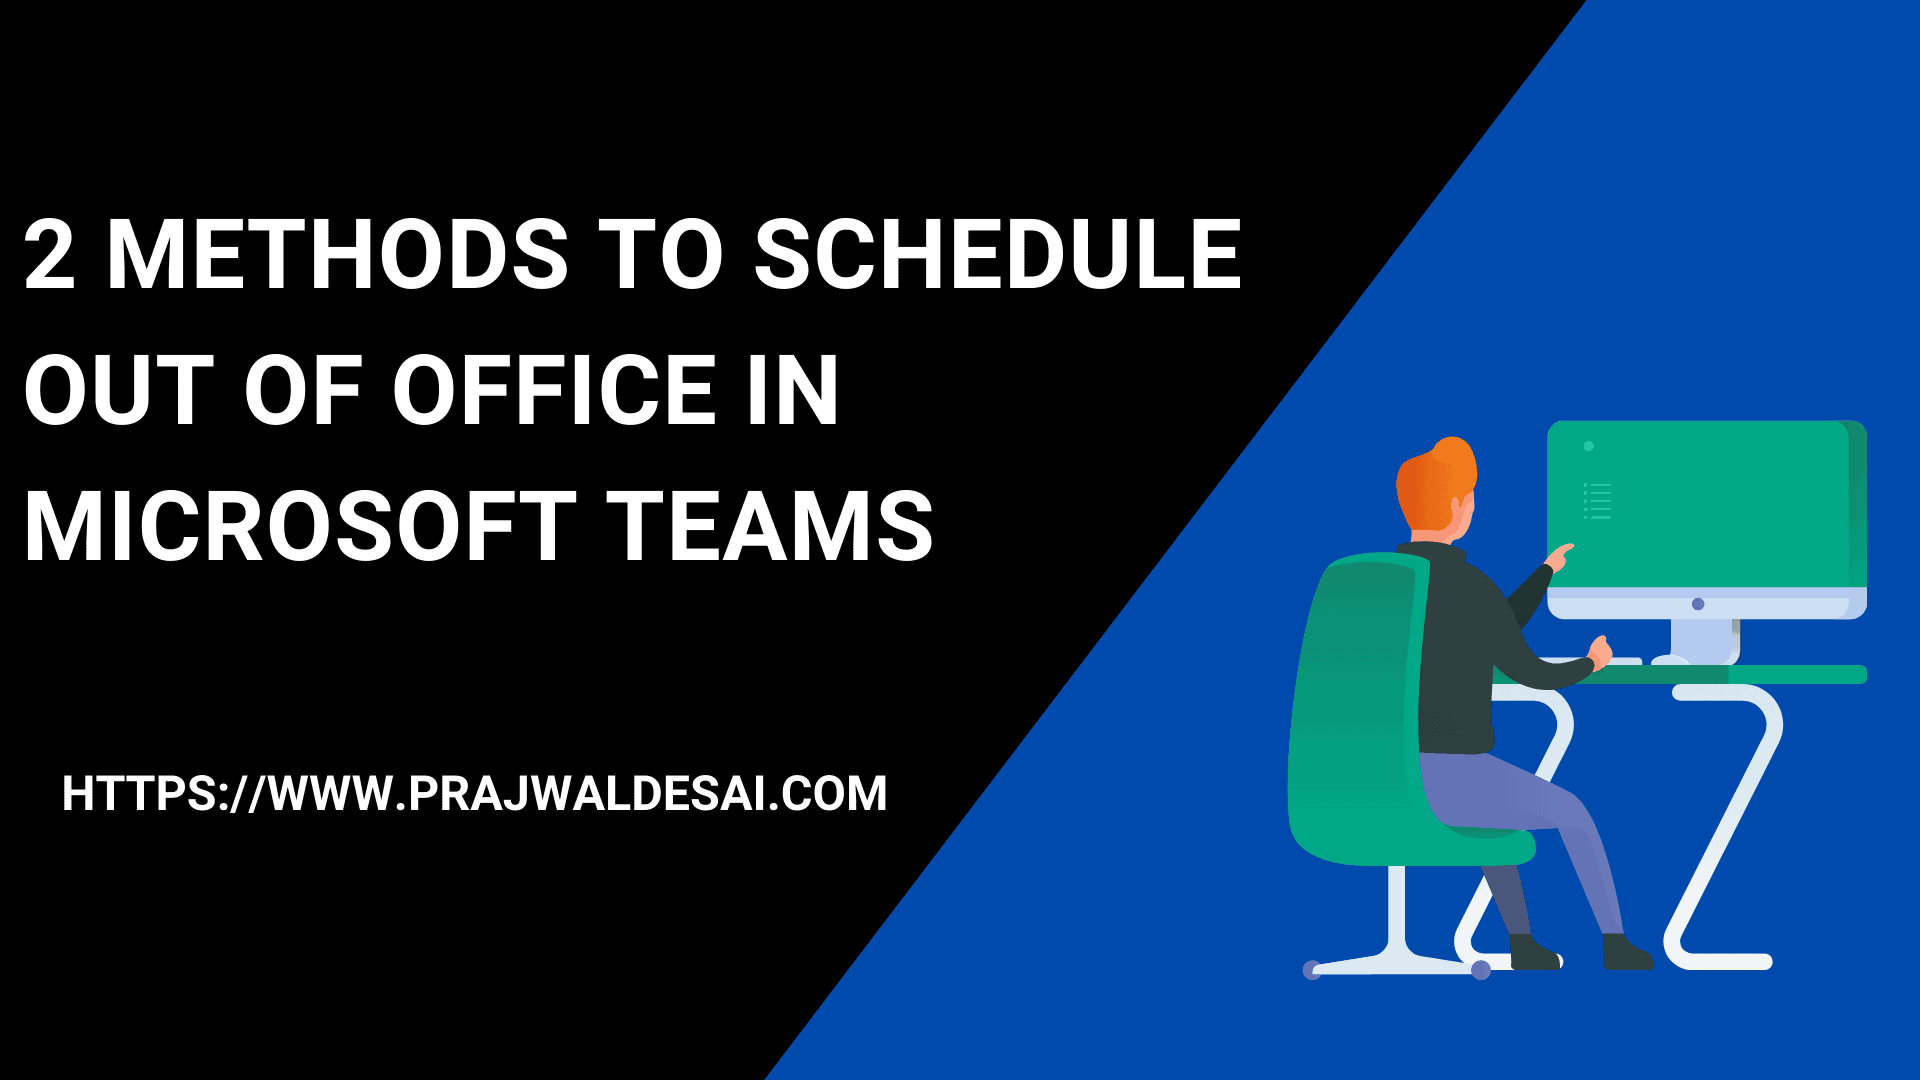 Schedule Out Of Office In Microsoft Teams